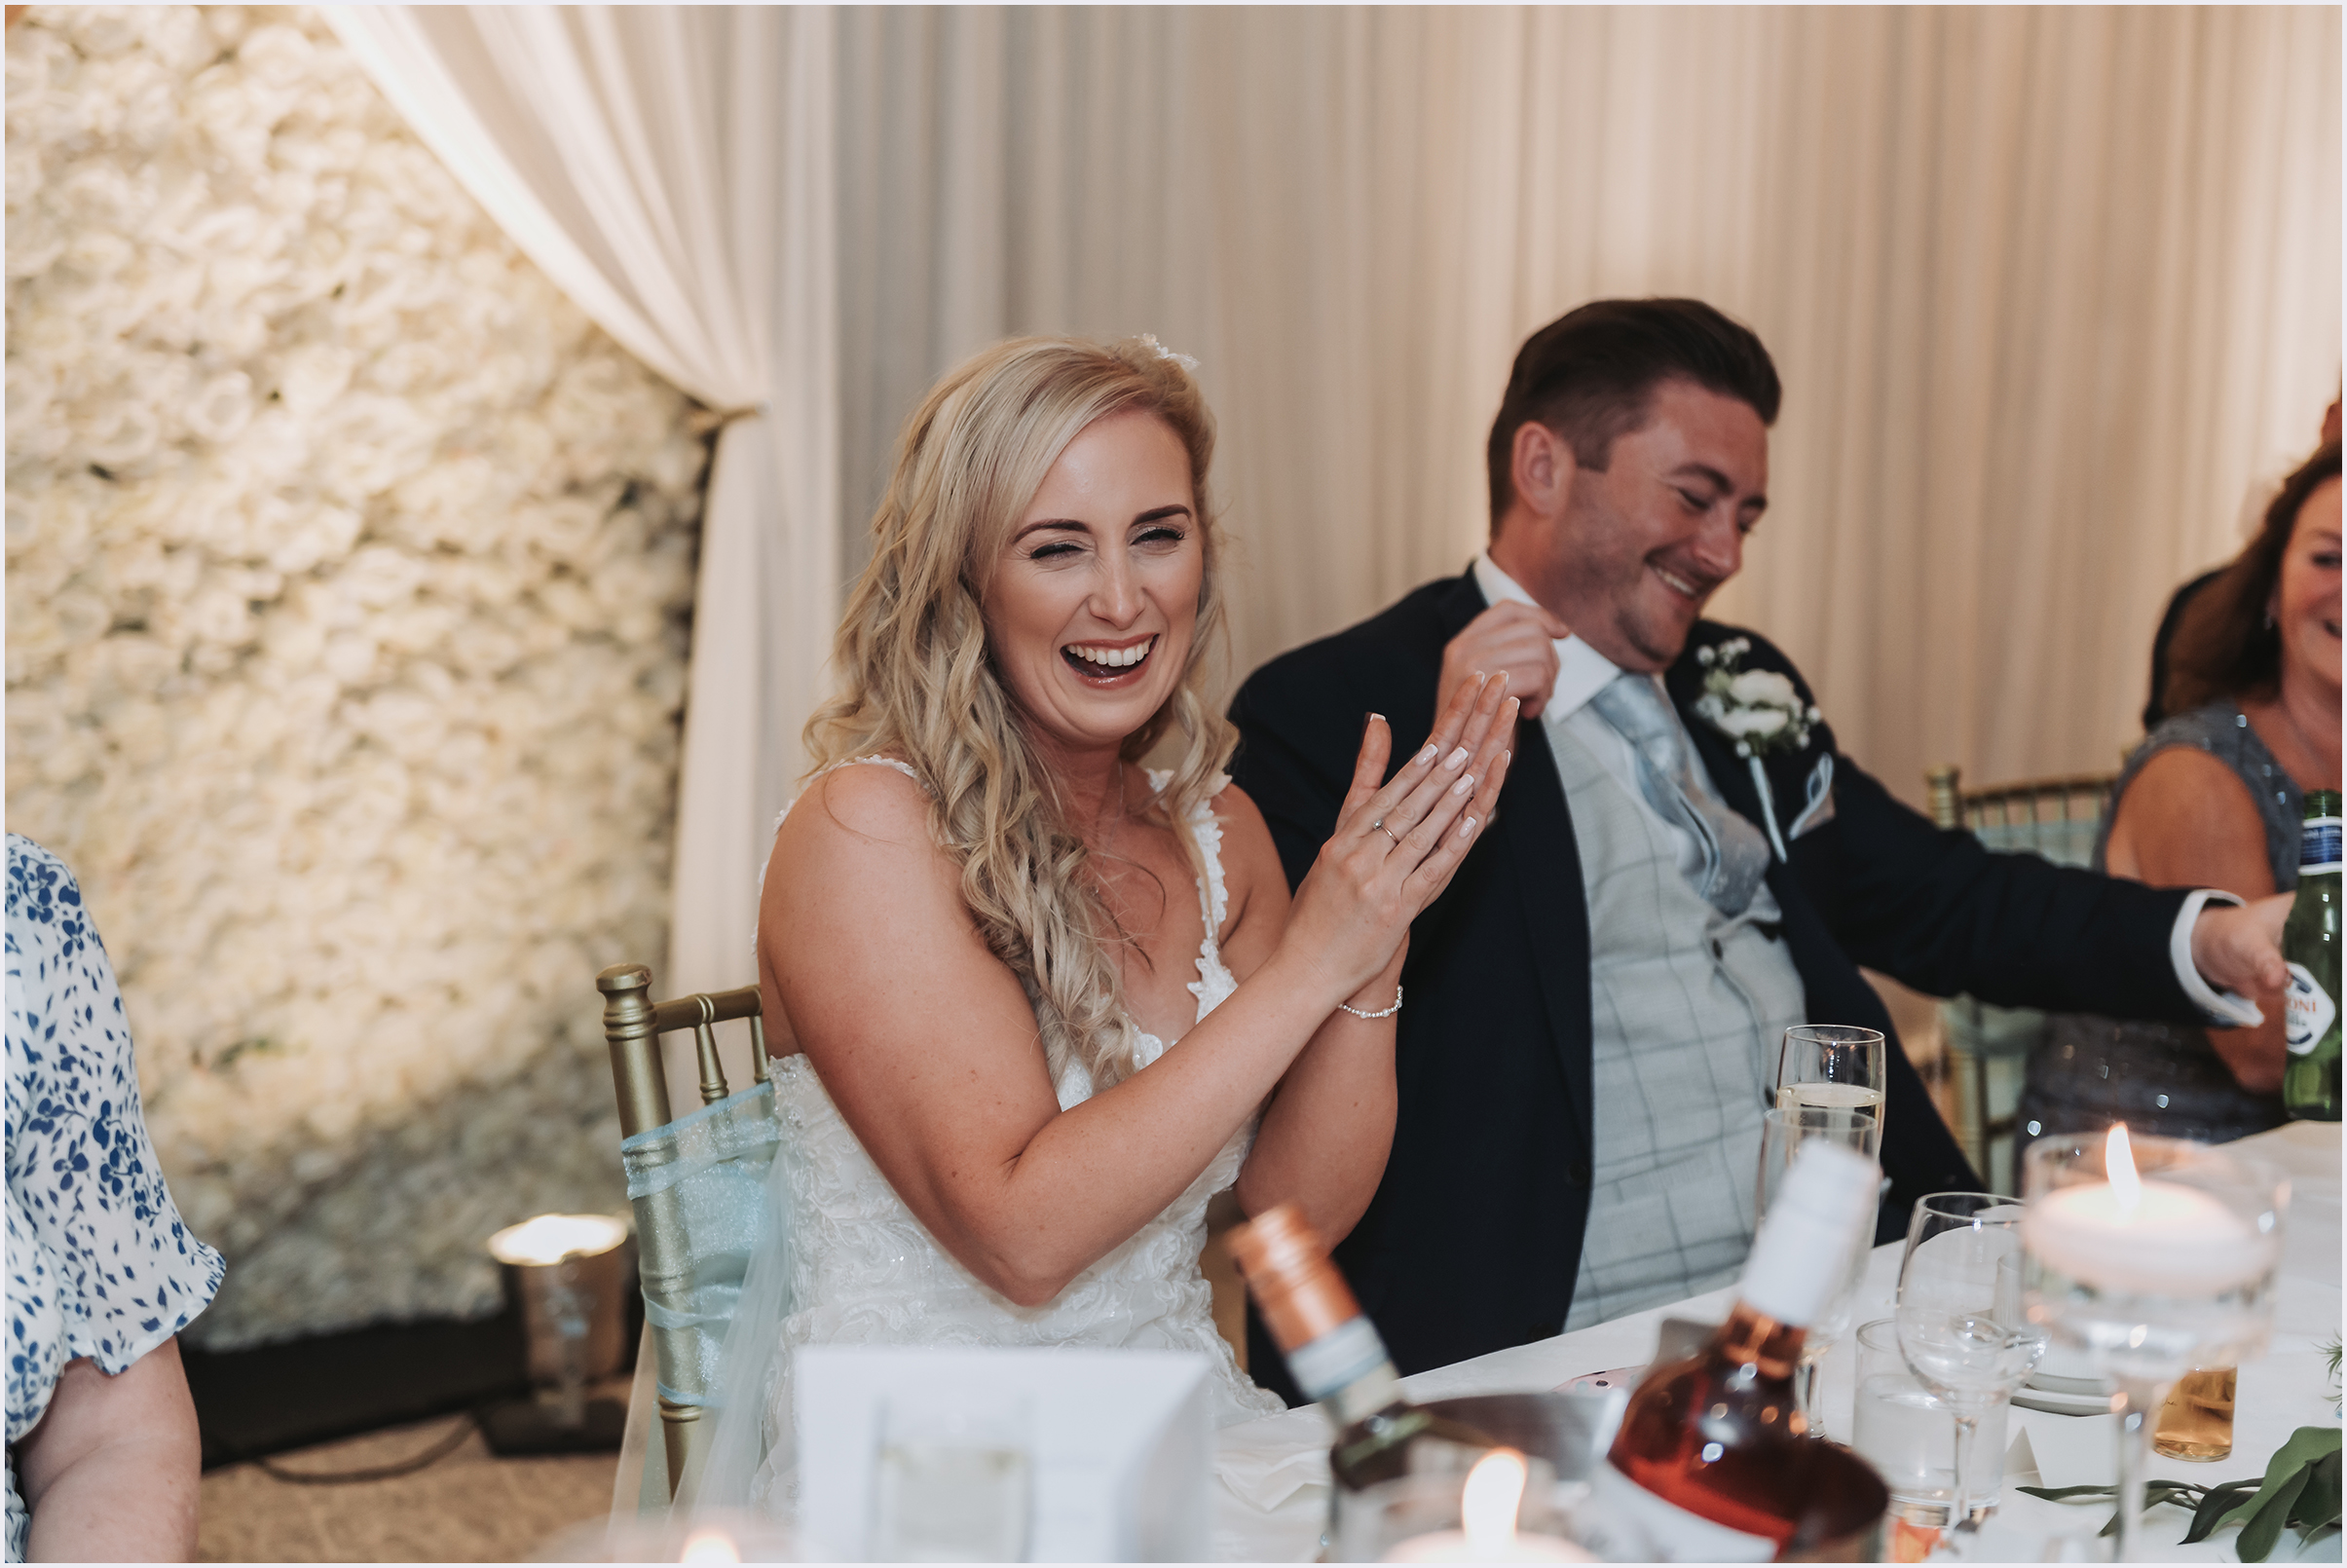 A bride clapping and laughing during the speeches at The Grosvenor Pulford Hotel and Spa.